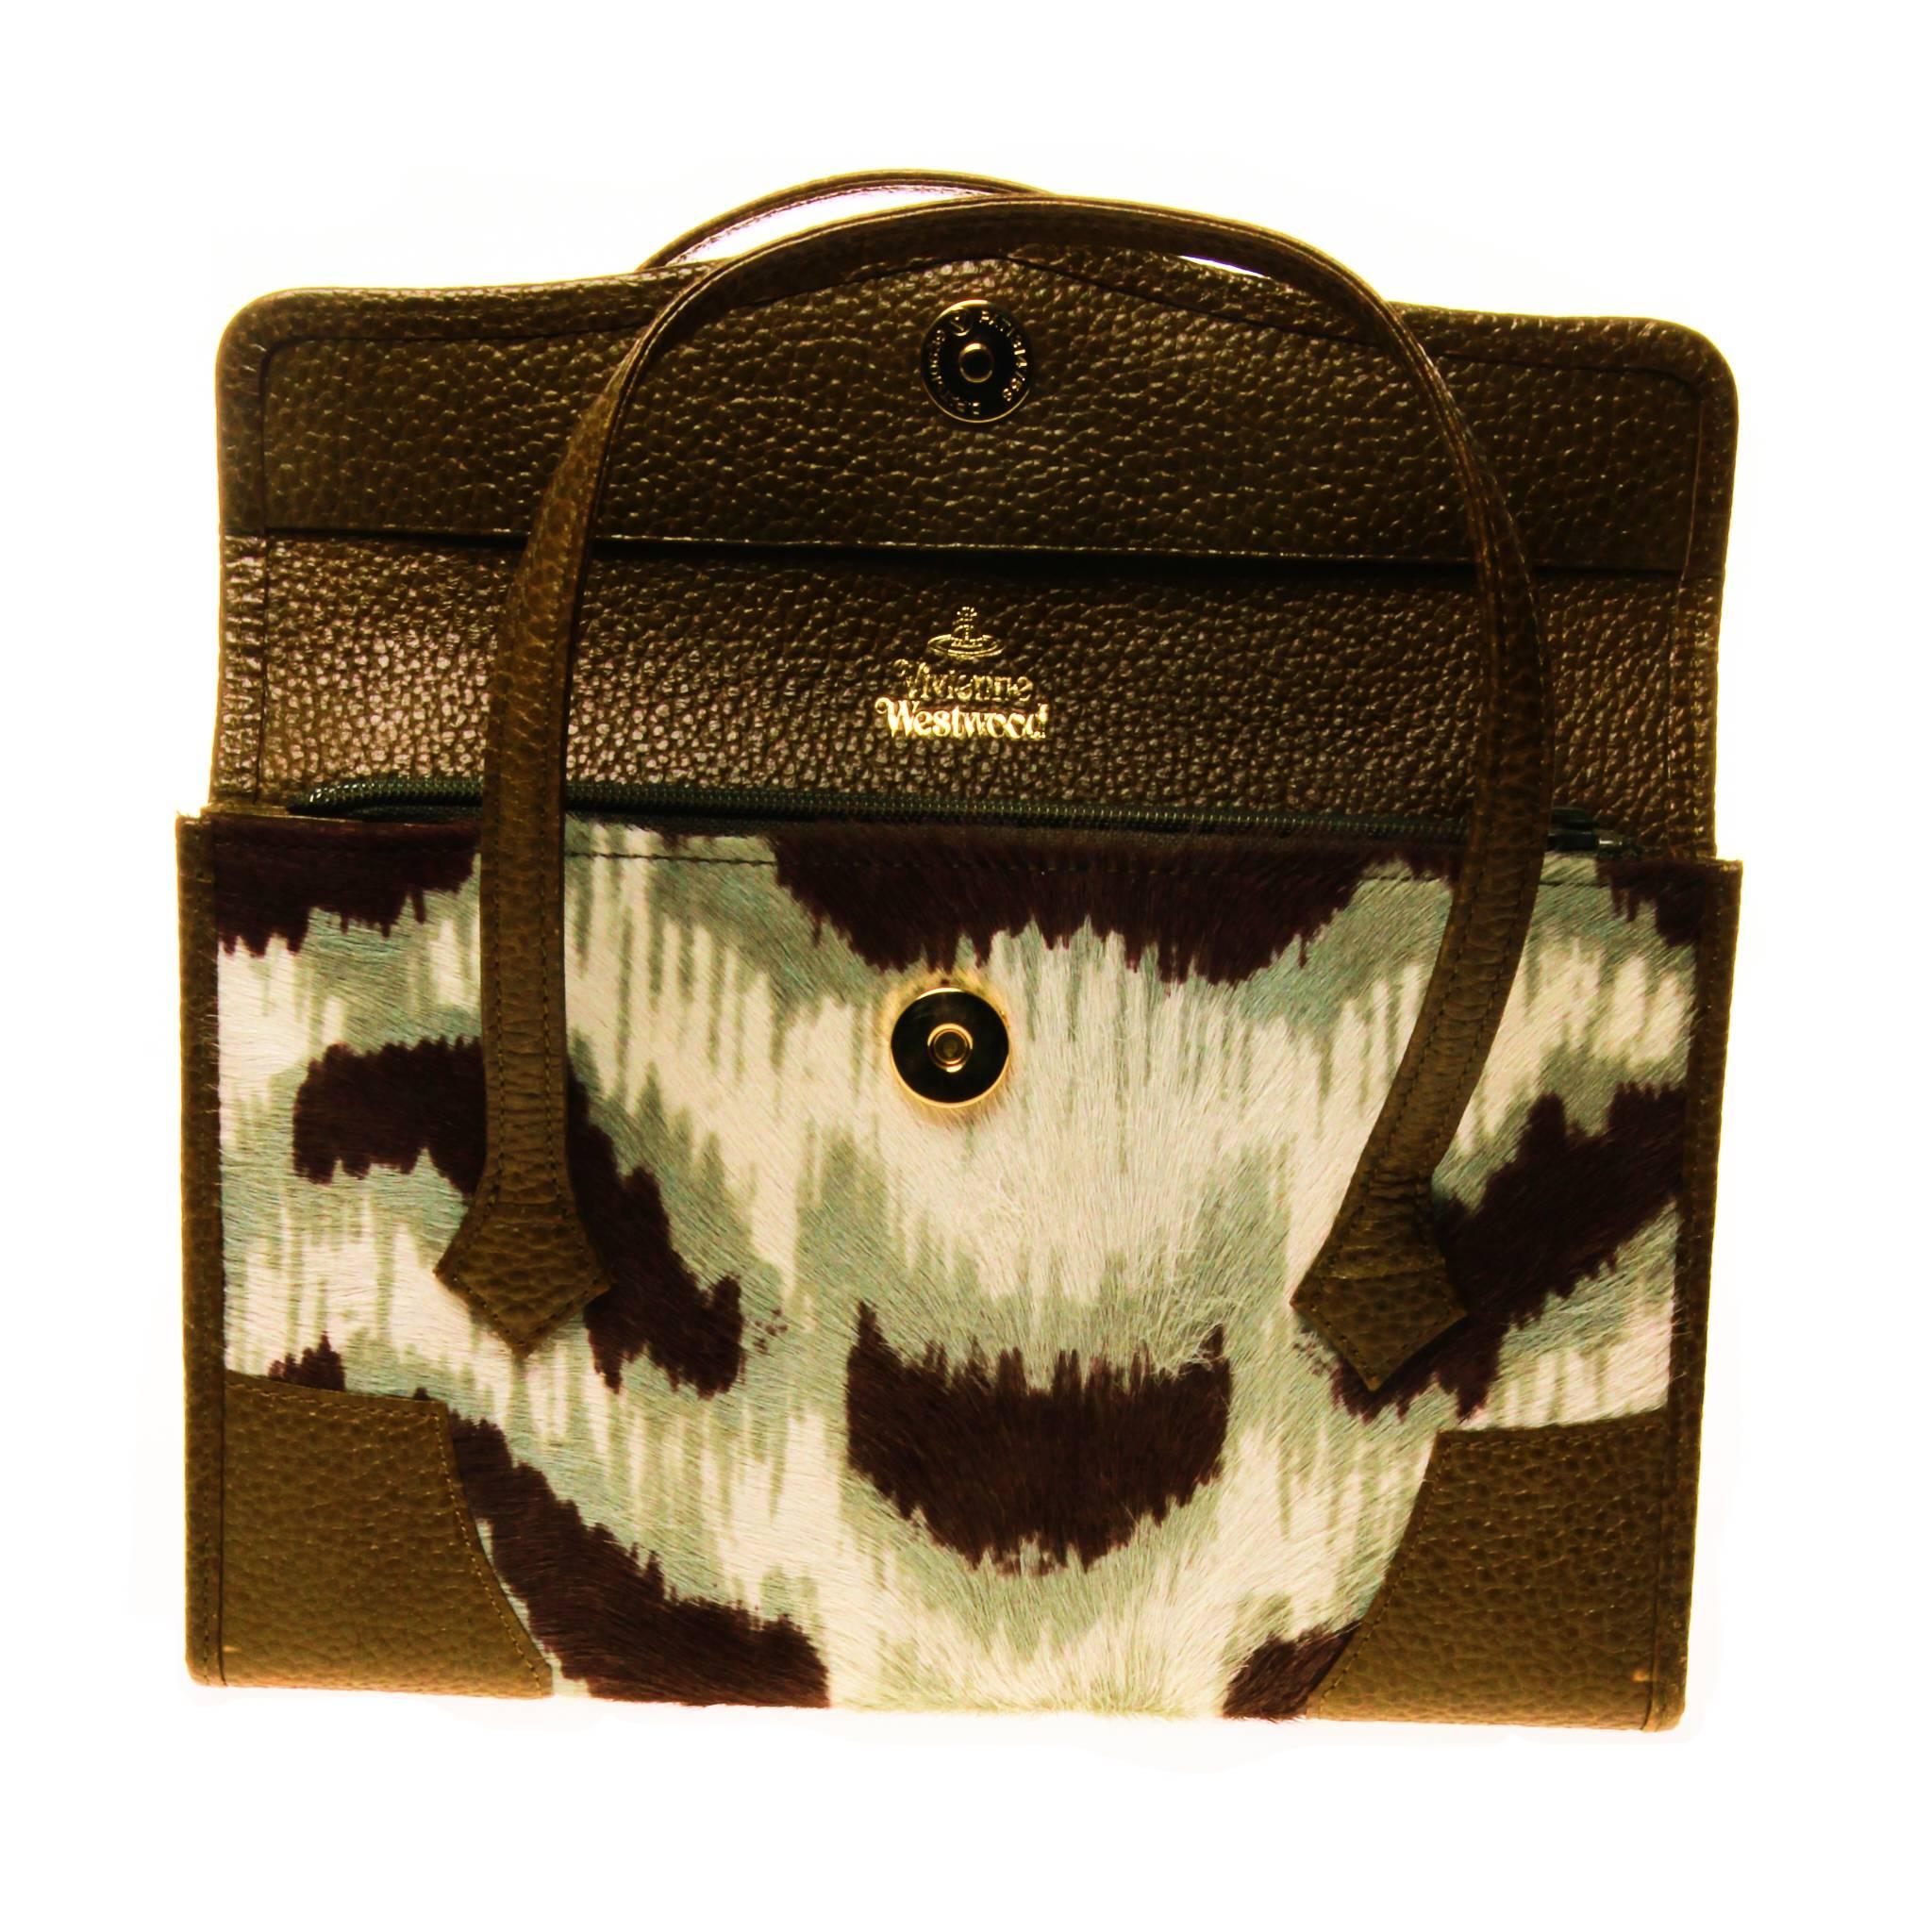 This VIVIENNE WESTWOOD printed pony hair top handle handbag is a unique and clever cross between a hand bag and a wallet. 
Beautifully crafted interior in olive green leather, features multiple compartments and card holders. A perfect travel